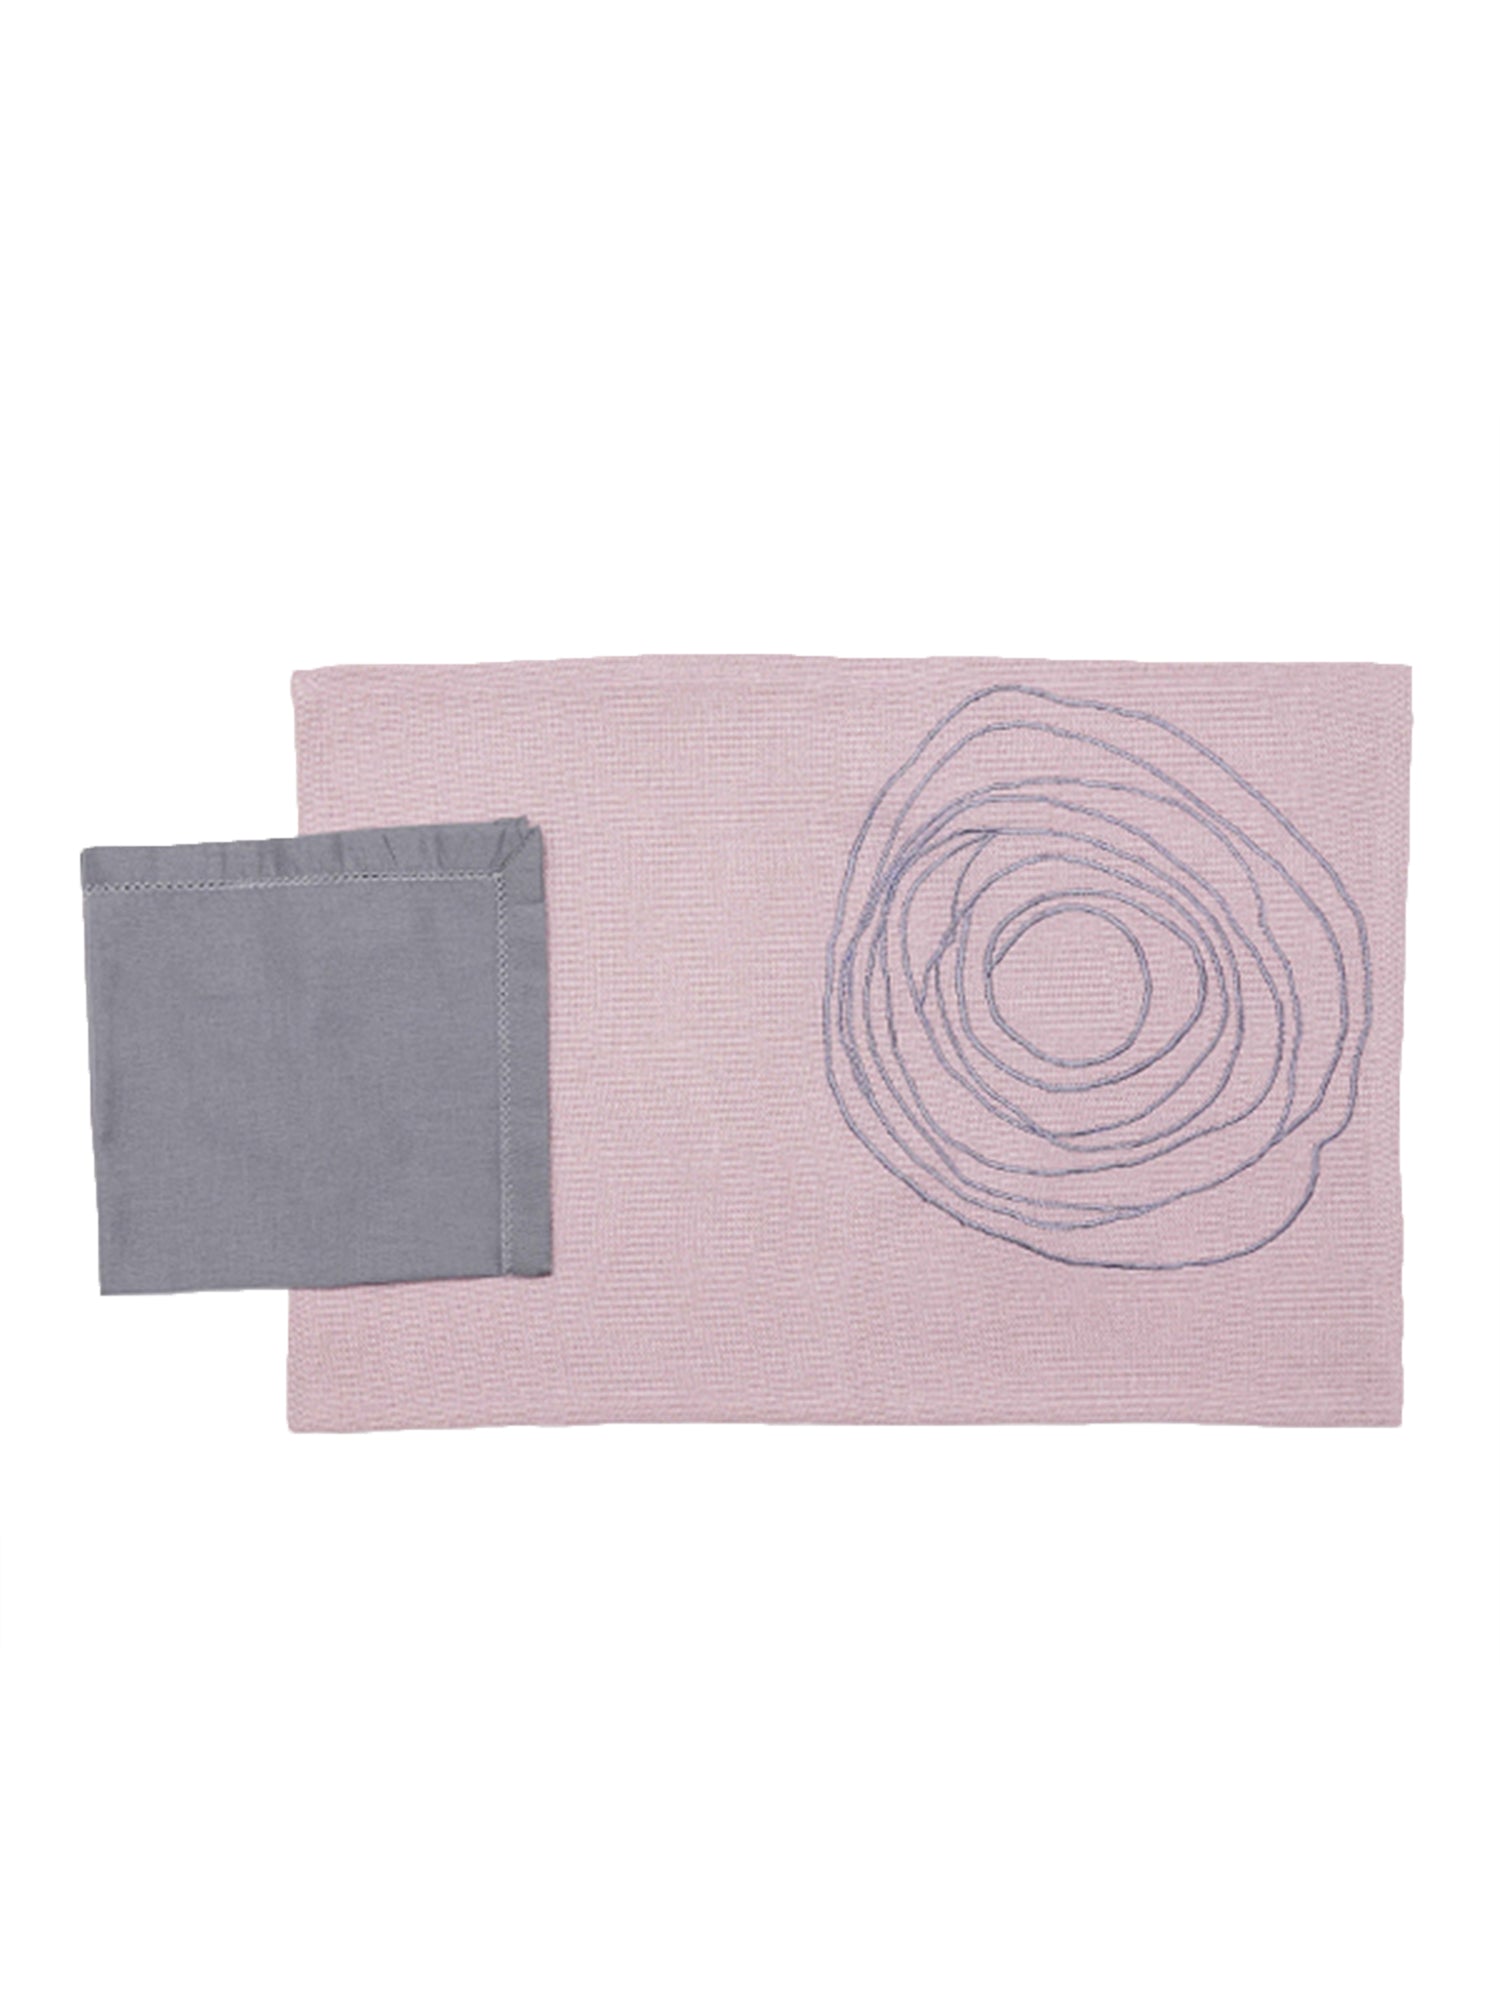 set of 6 embroidered mats and napkins in light pink and grey color - 13x19 inch